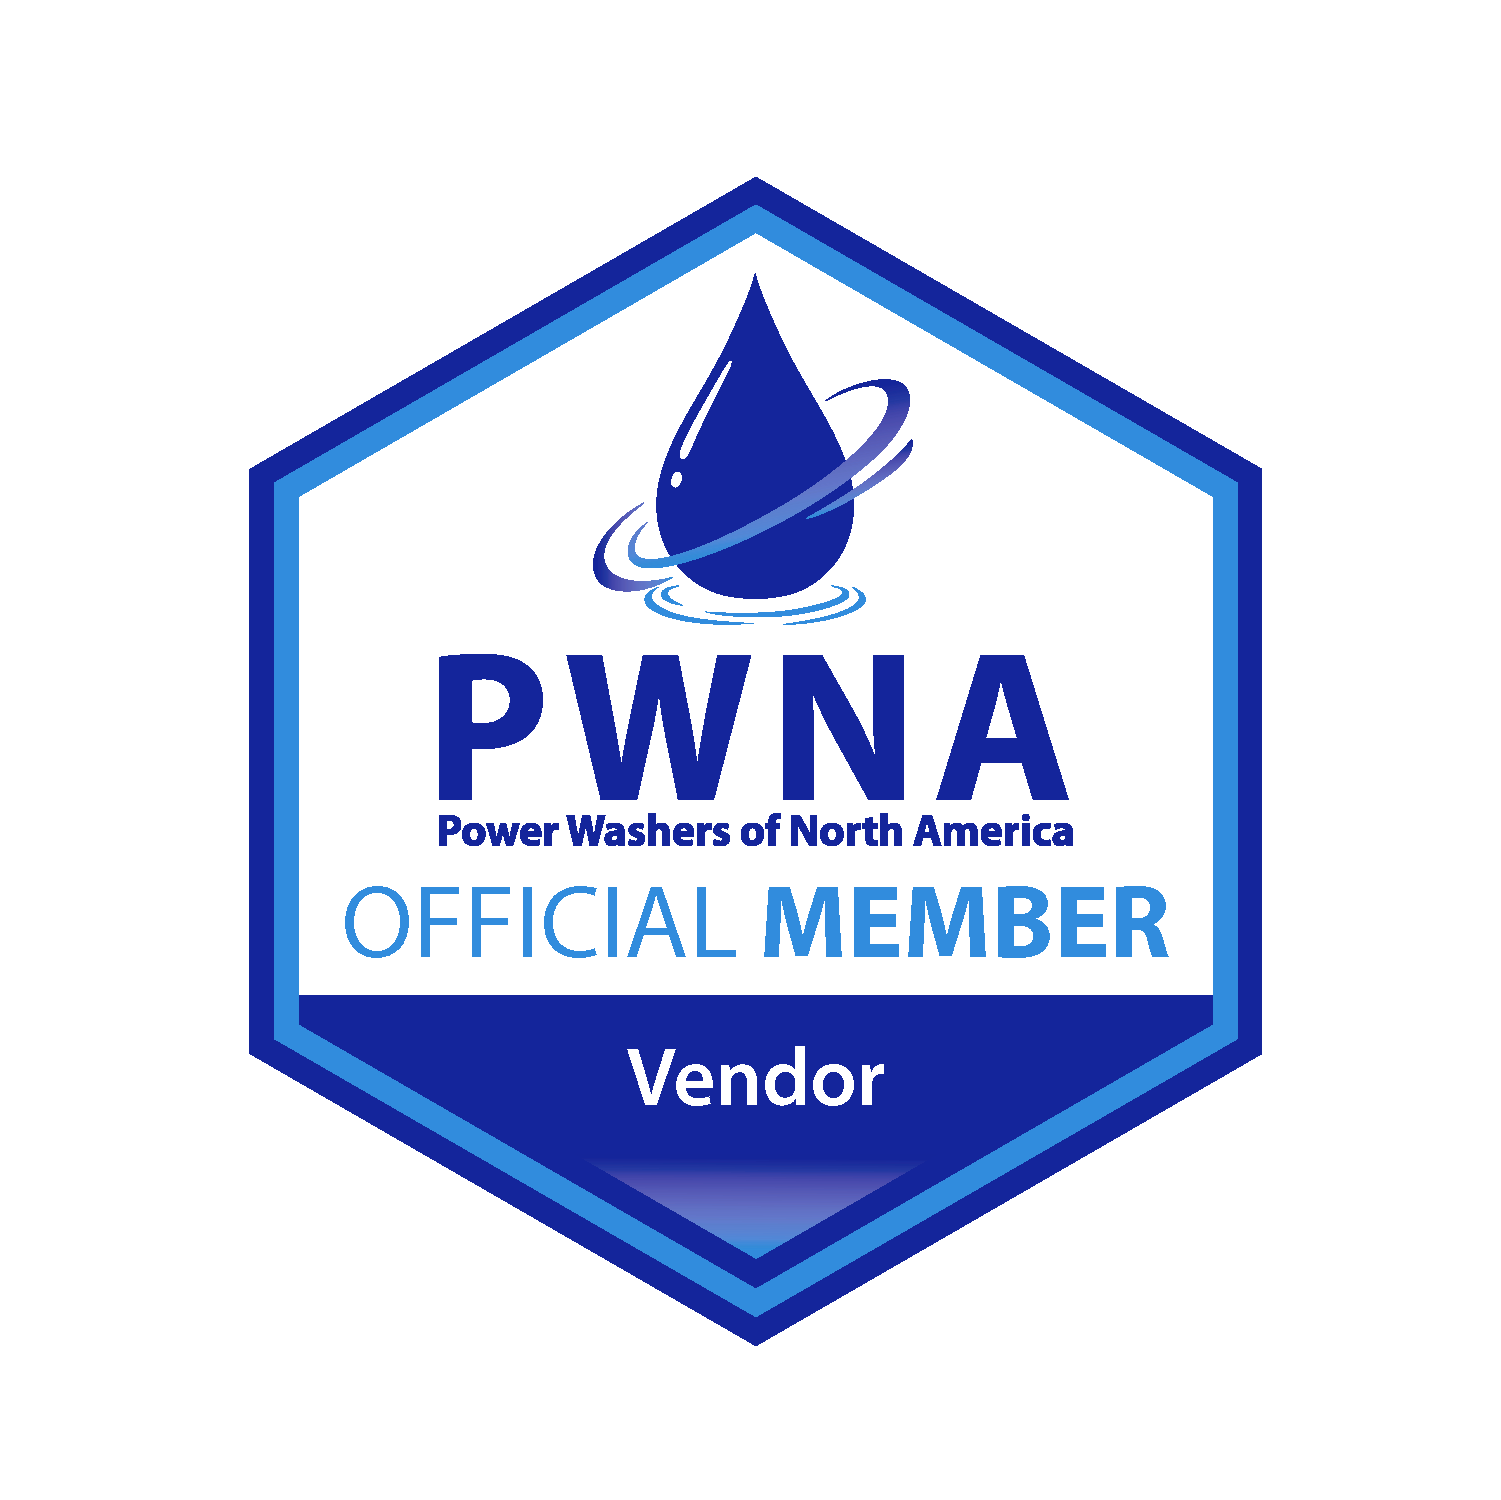 Power Washers of North America Vendor